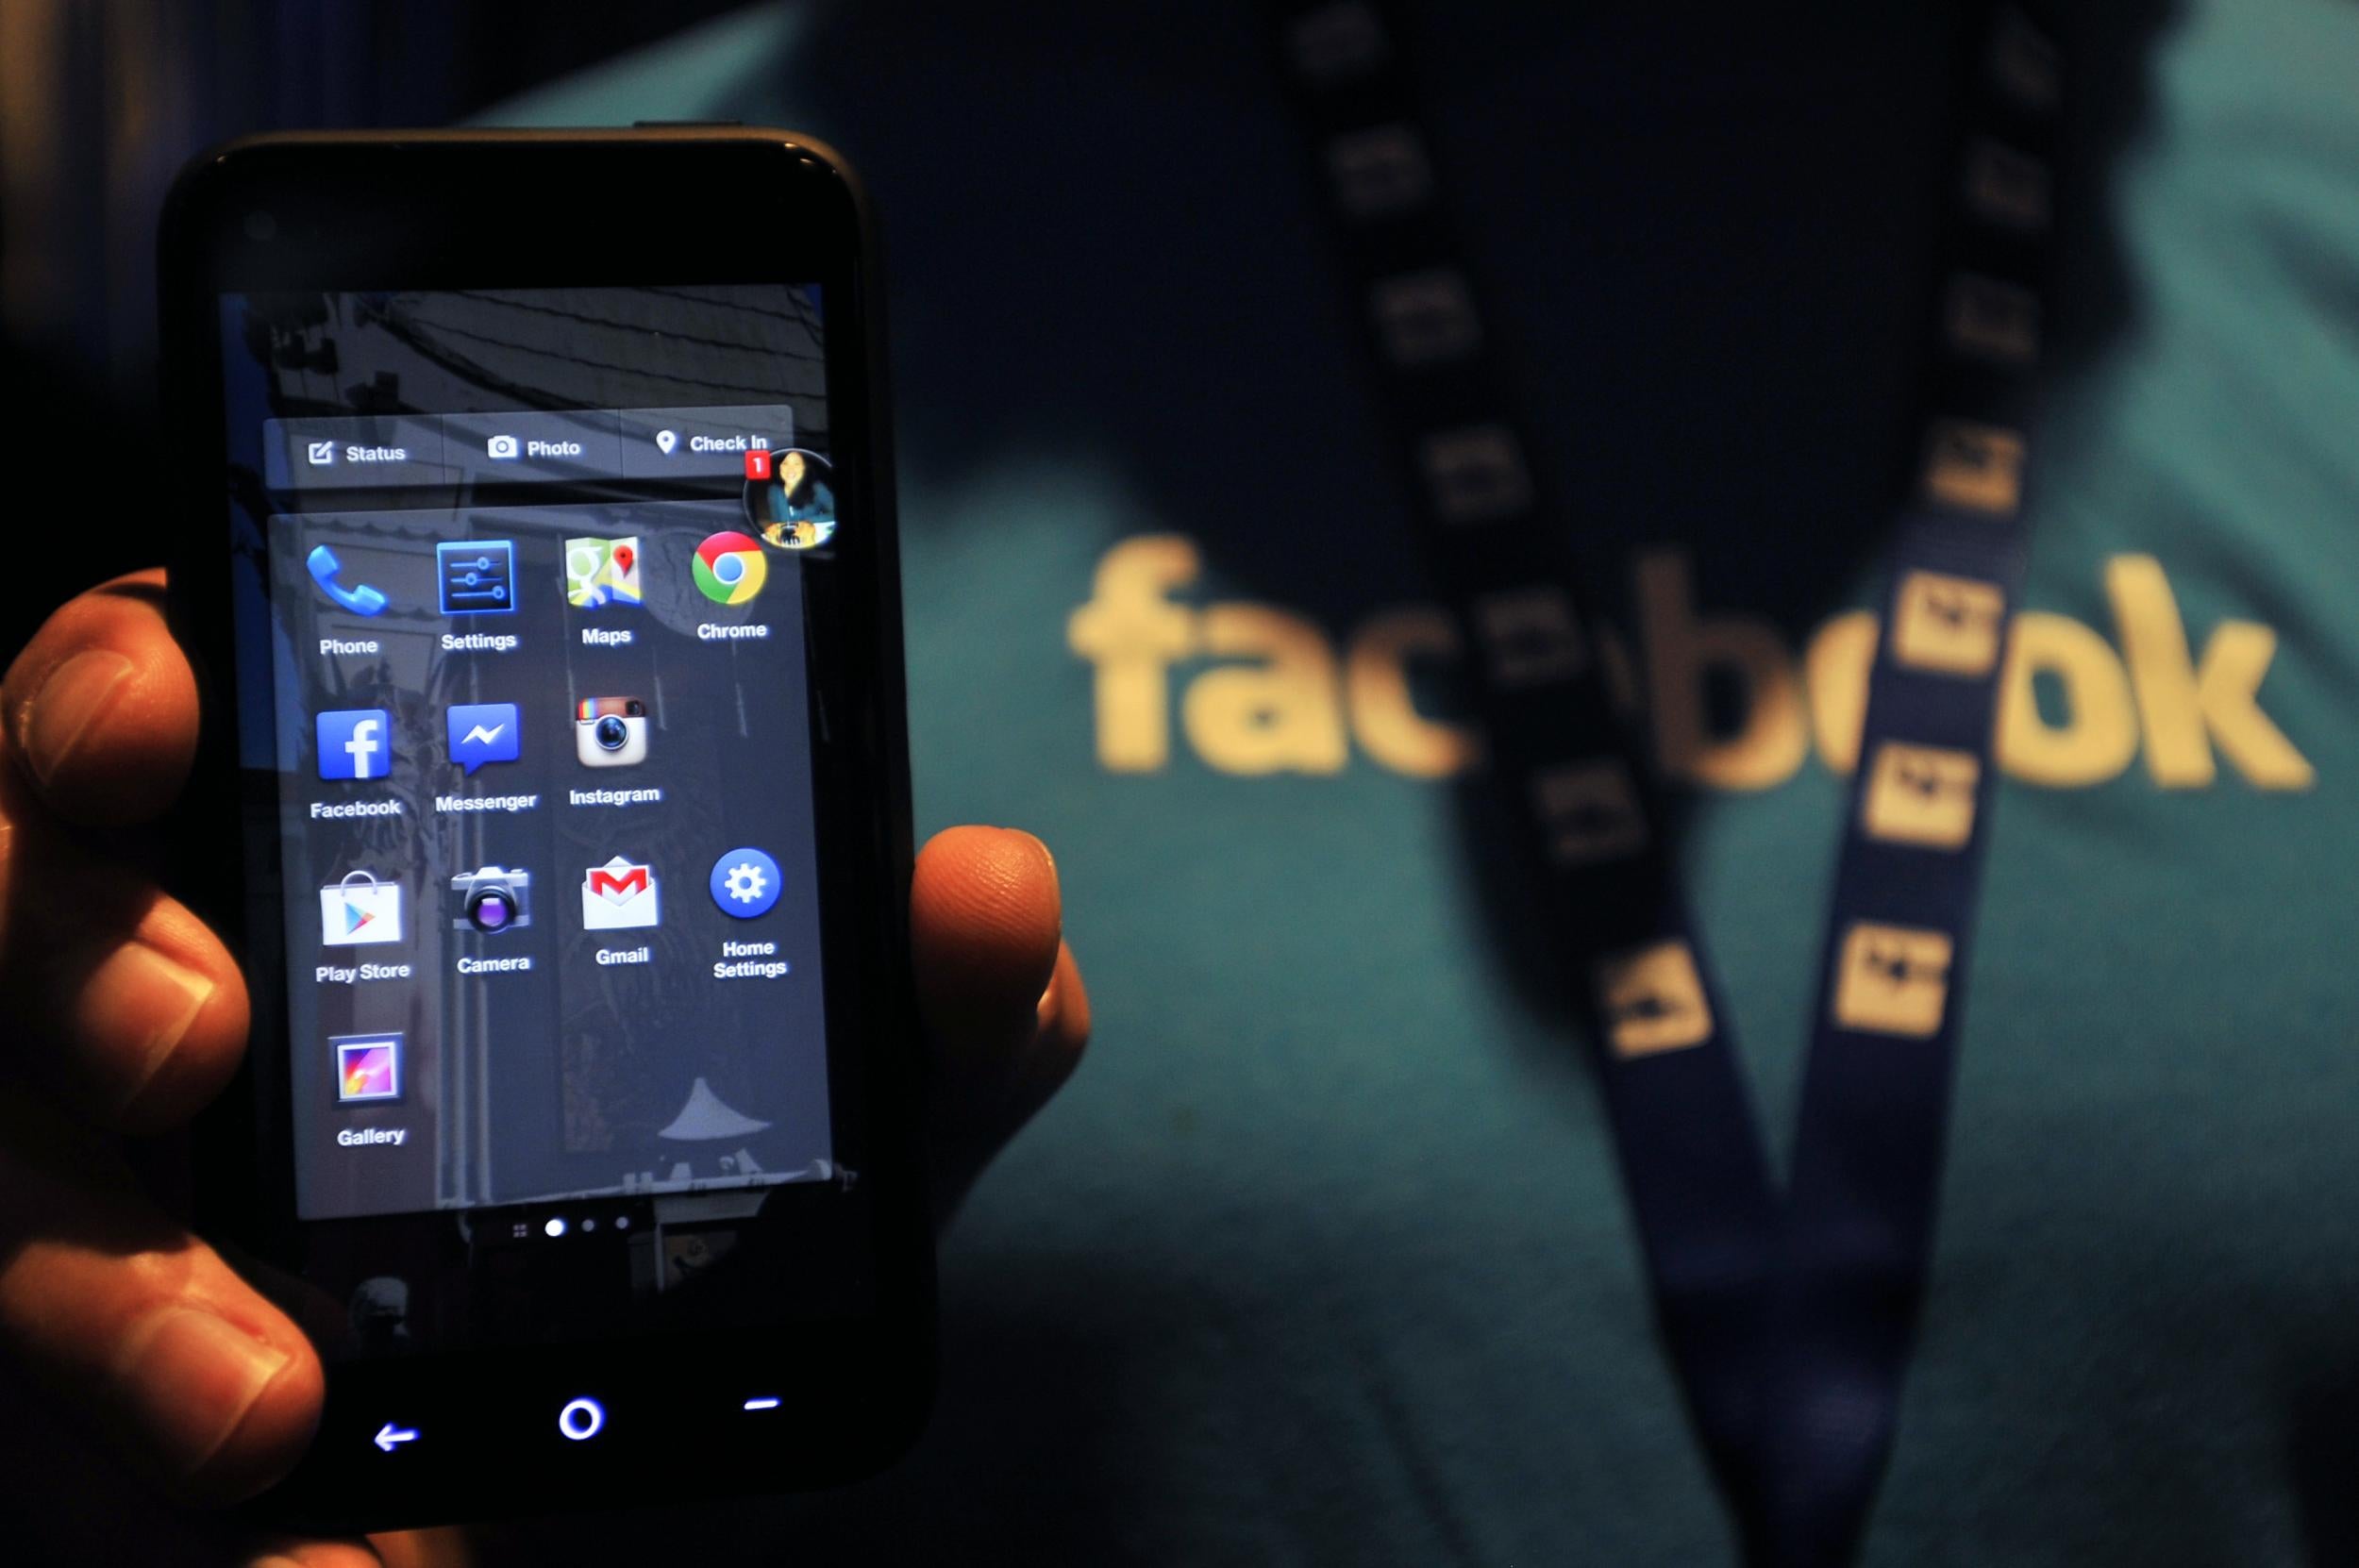 Facebook has begun rolling out the new feature to users of its Android app